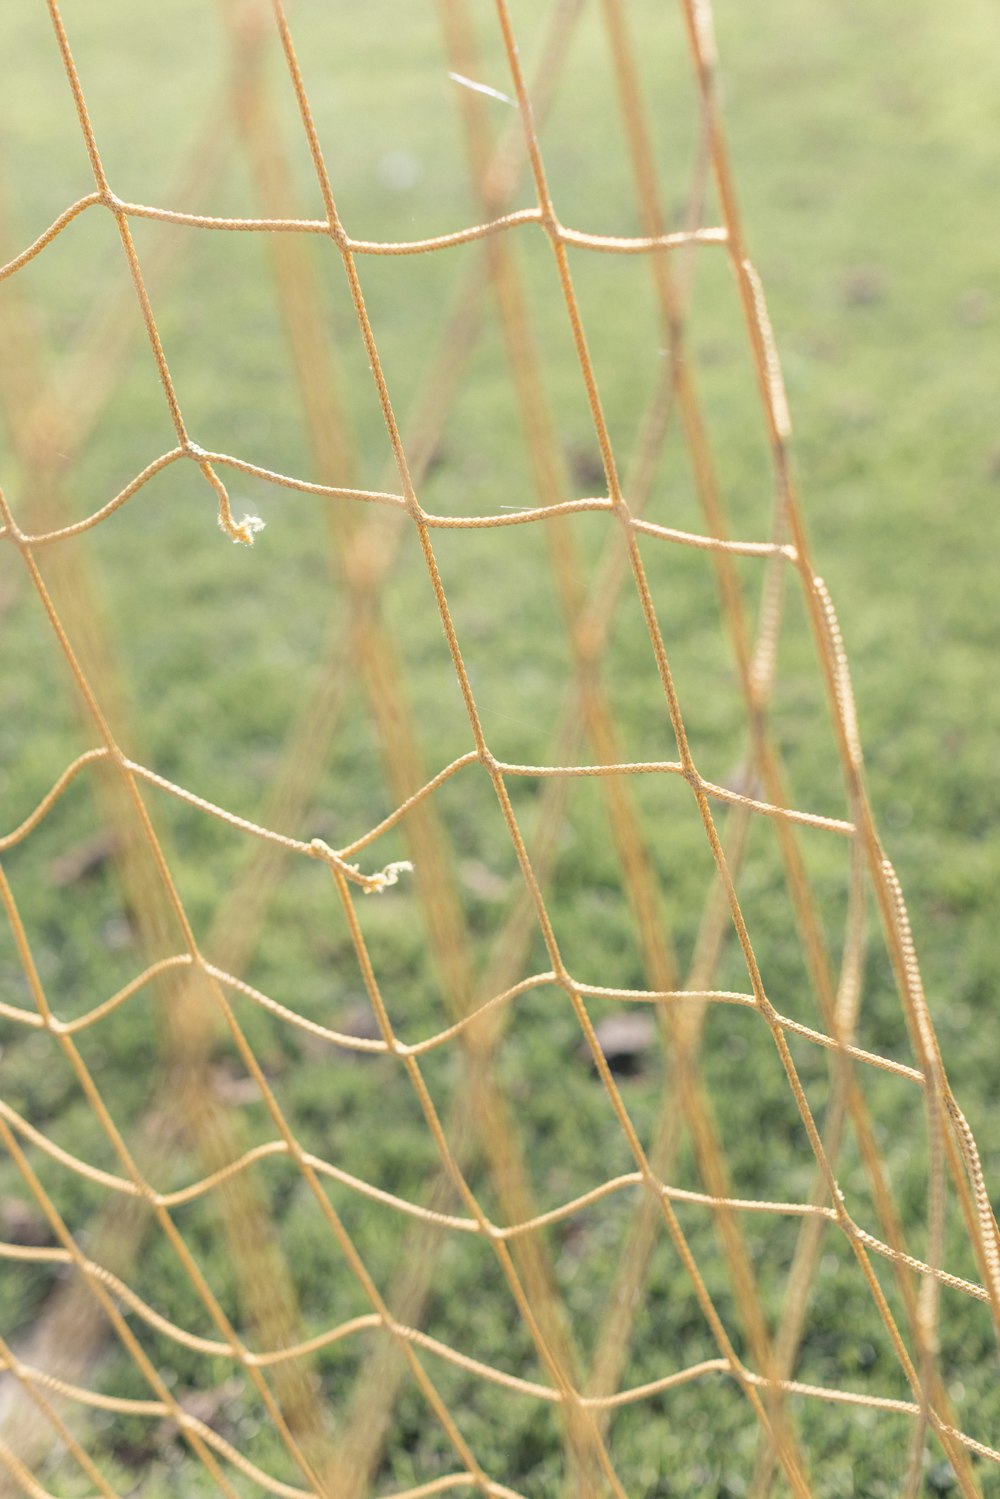 a close up of a soccer goal net with grass in the background